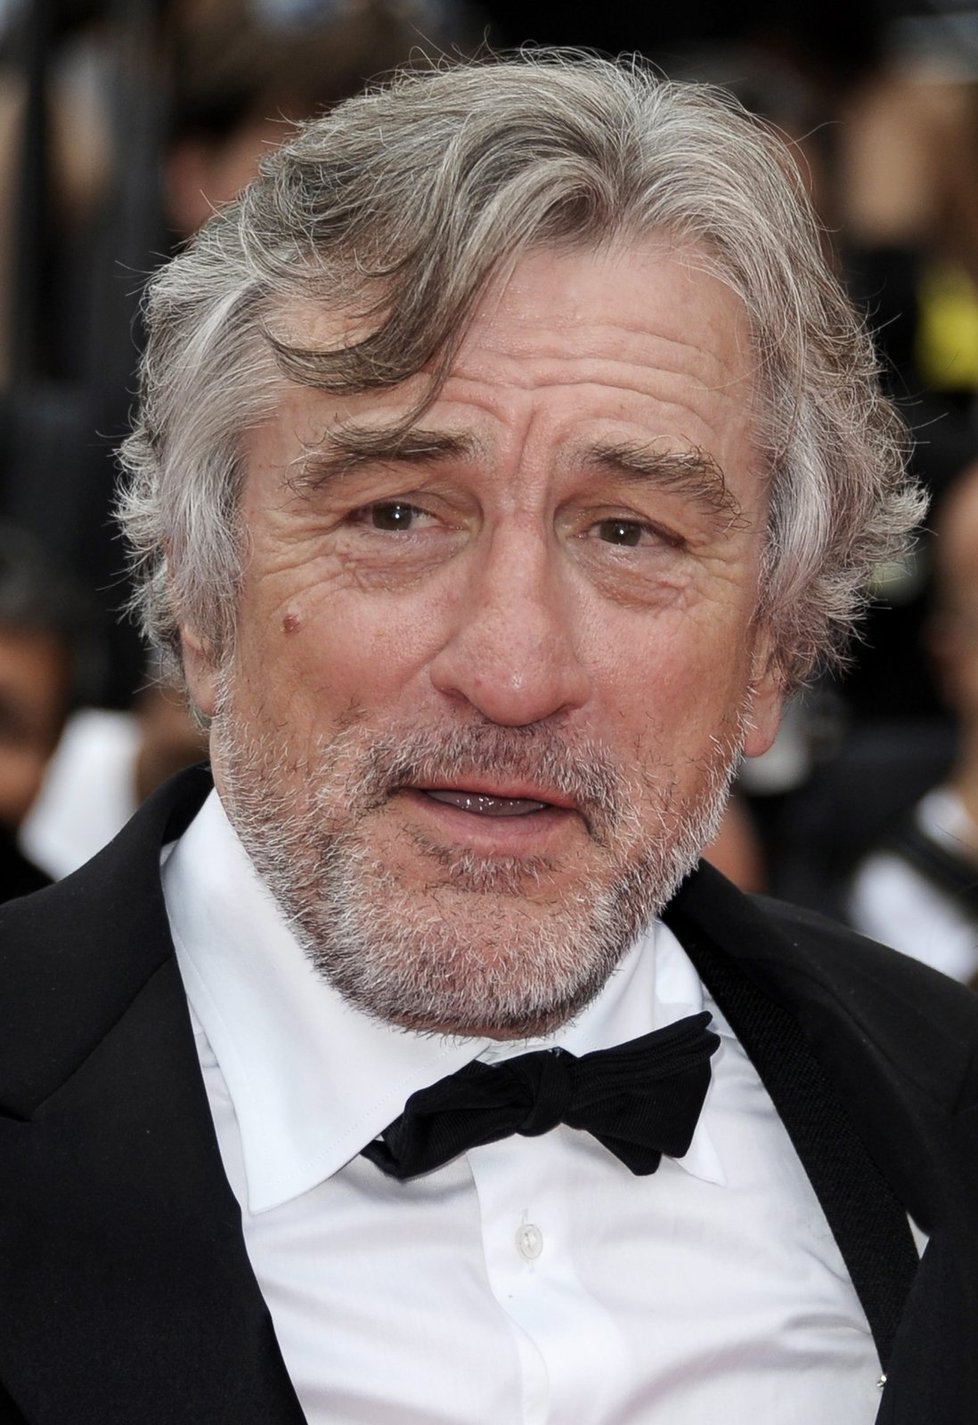 epa03822759 (FILE) A file picture dated 22 May 2011 shows US actor and director Robert De Niro arriving for the screening of &#39;Les Bien-Aimes&#39; (Beloved) and the closing award ceremony of the 64th Cannes Film Festival in Cannes, France. De Niro will turn 70 on 17 August 2013.  EPA/CHRISTOPHE KARABA